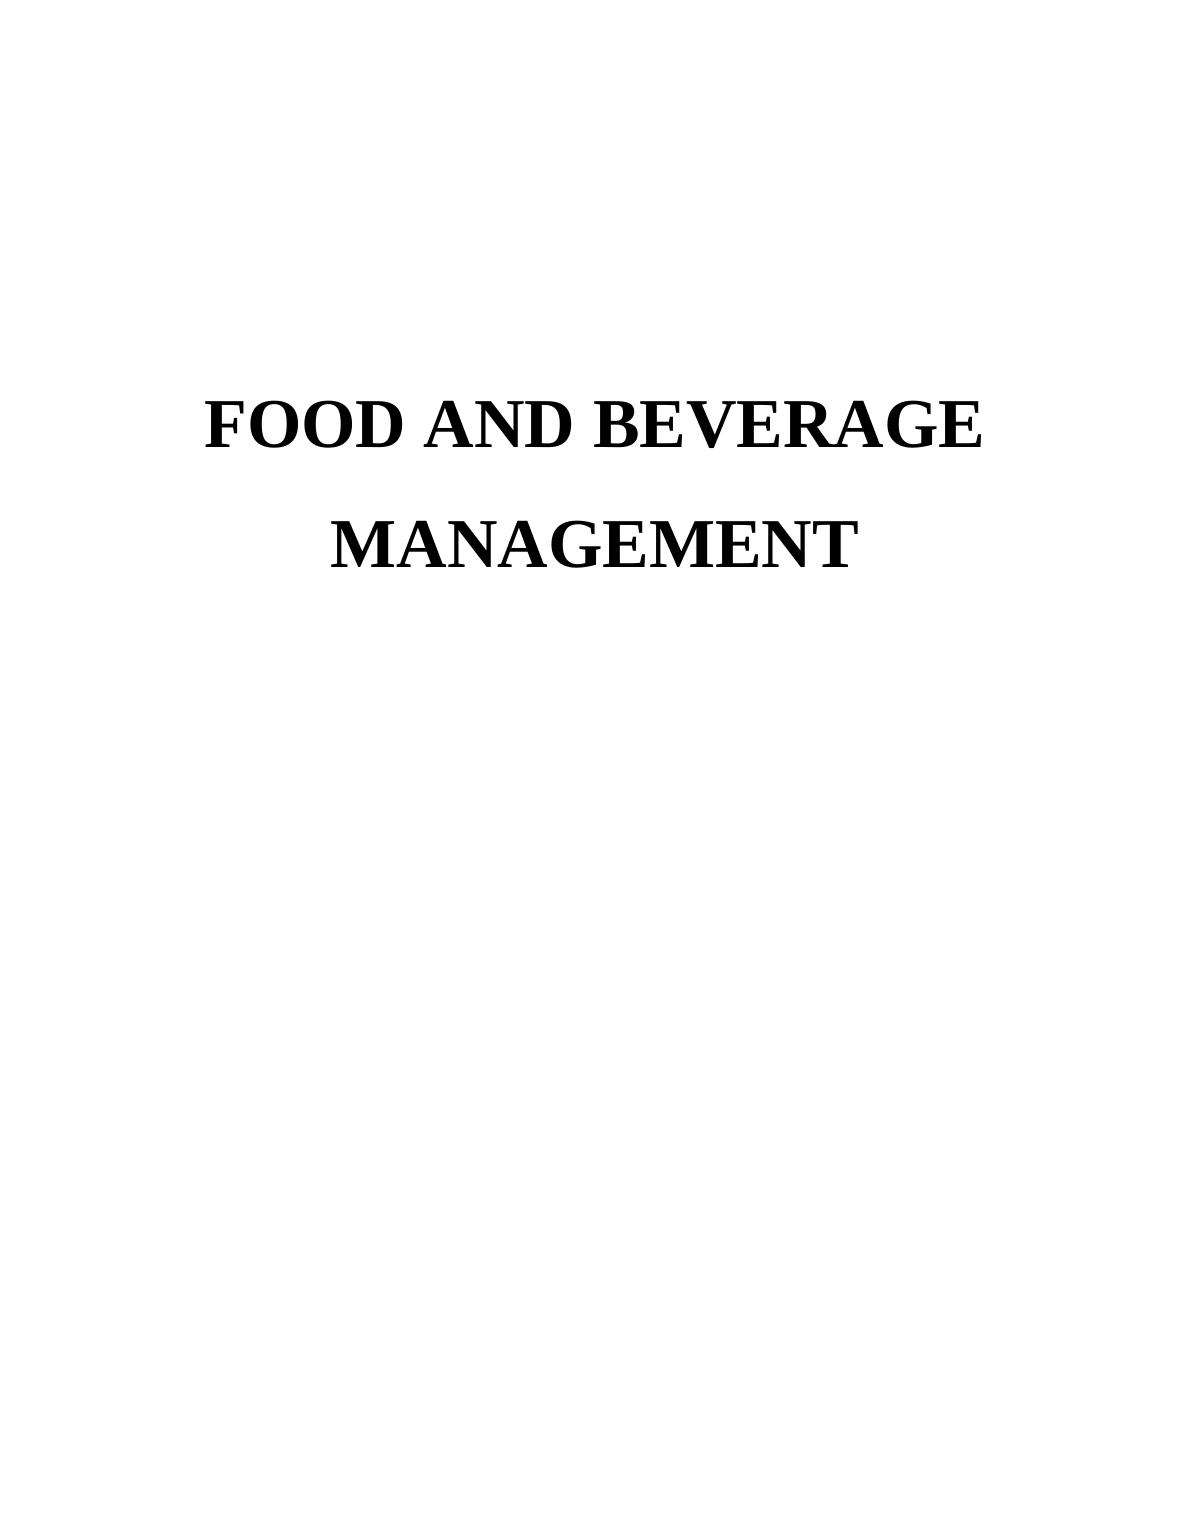 Food and Beverage Management - Assignment_1